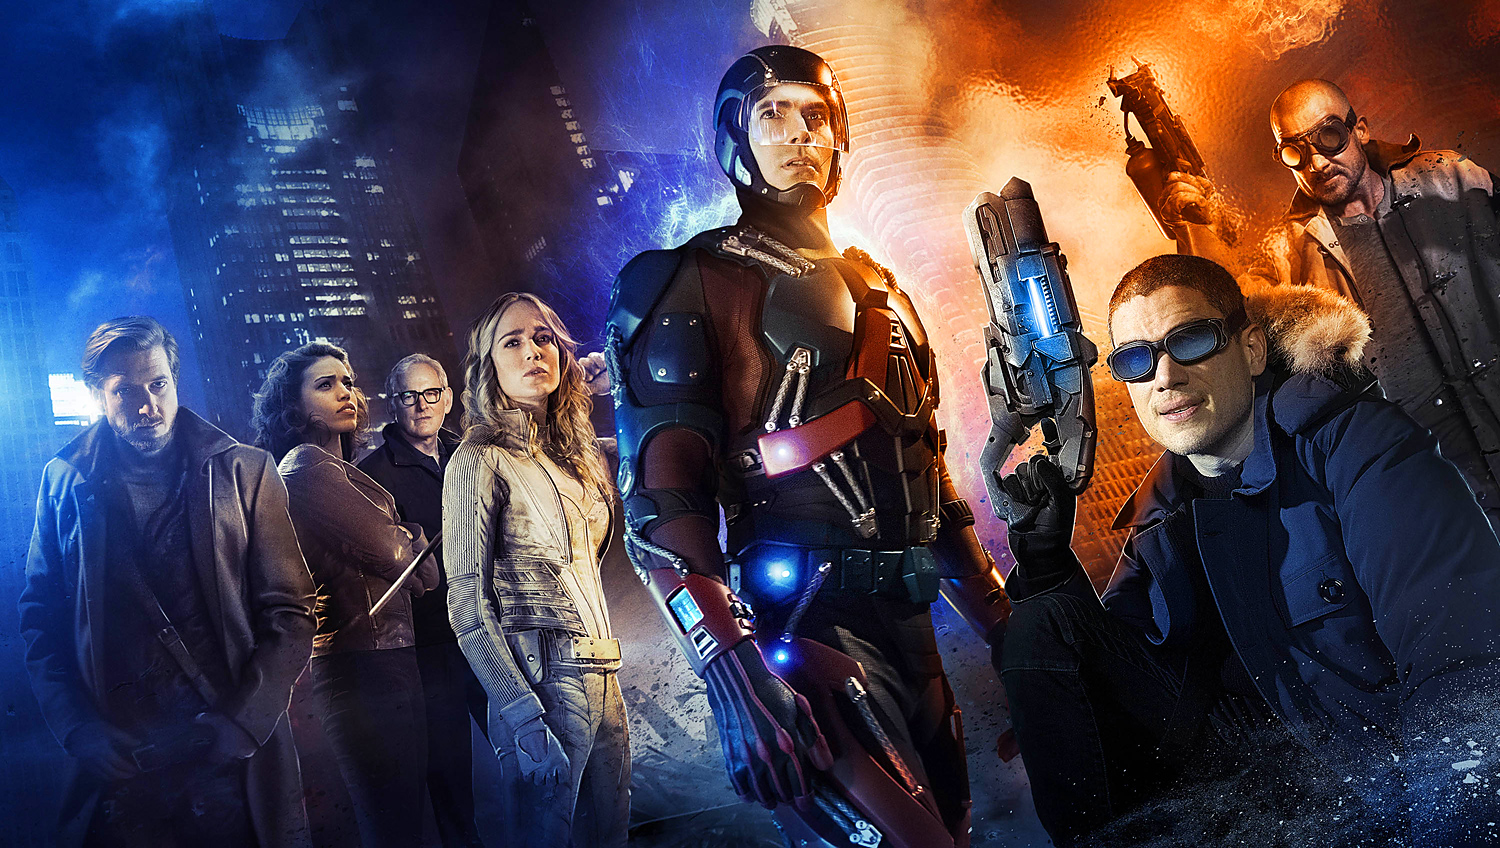 1st Look: ‘DC’s ‘Legends of Tomorrow” Trailer